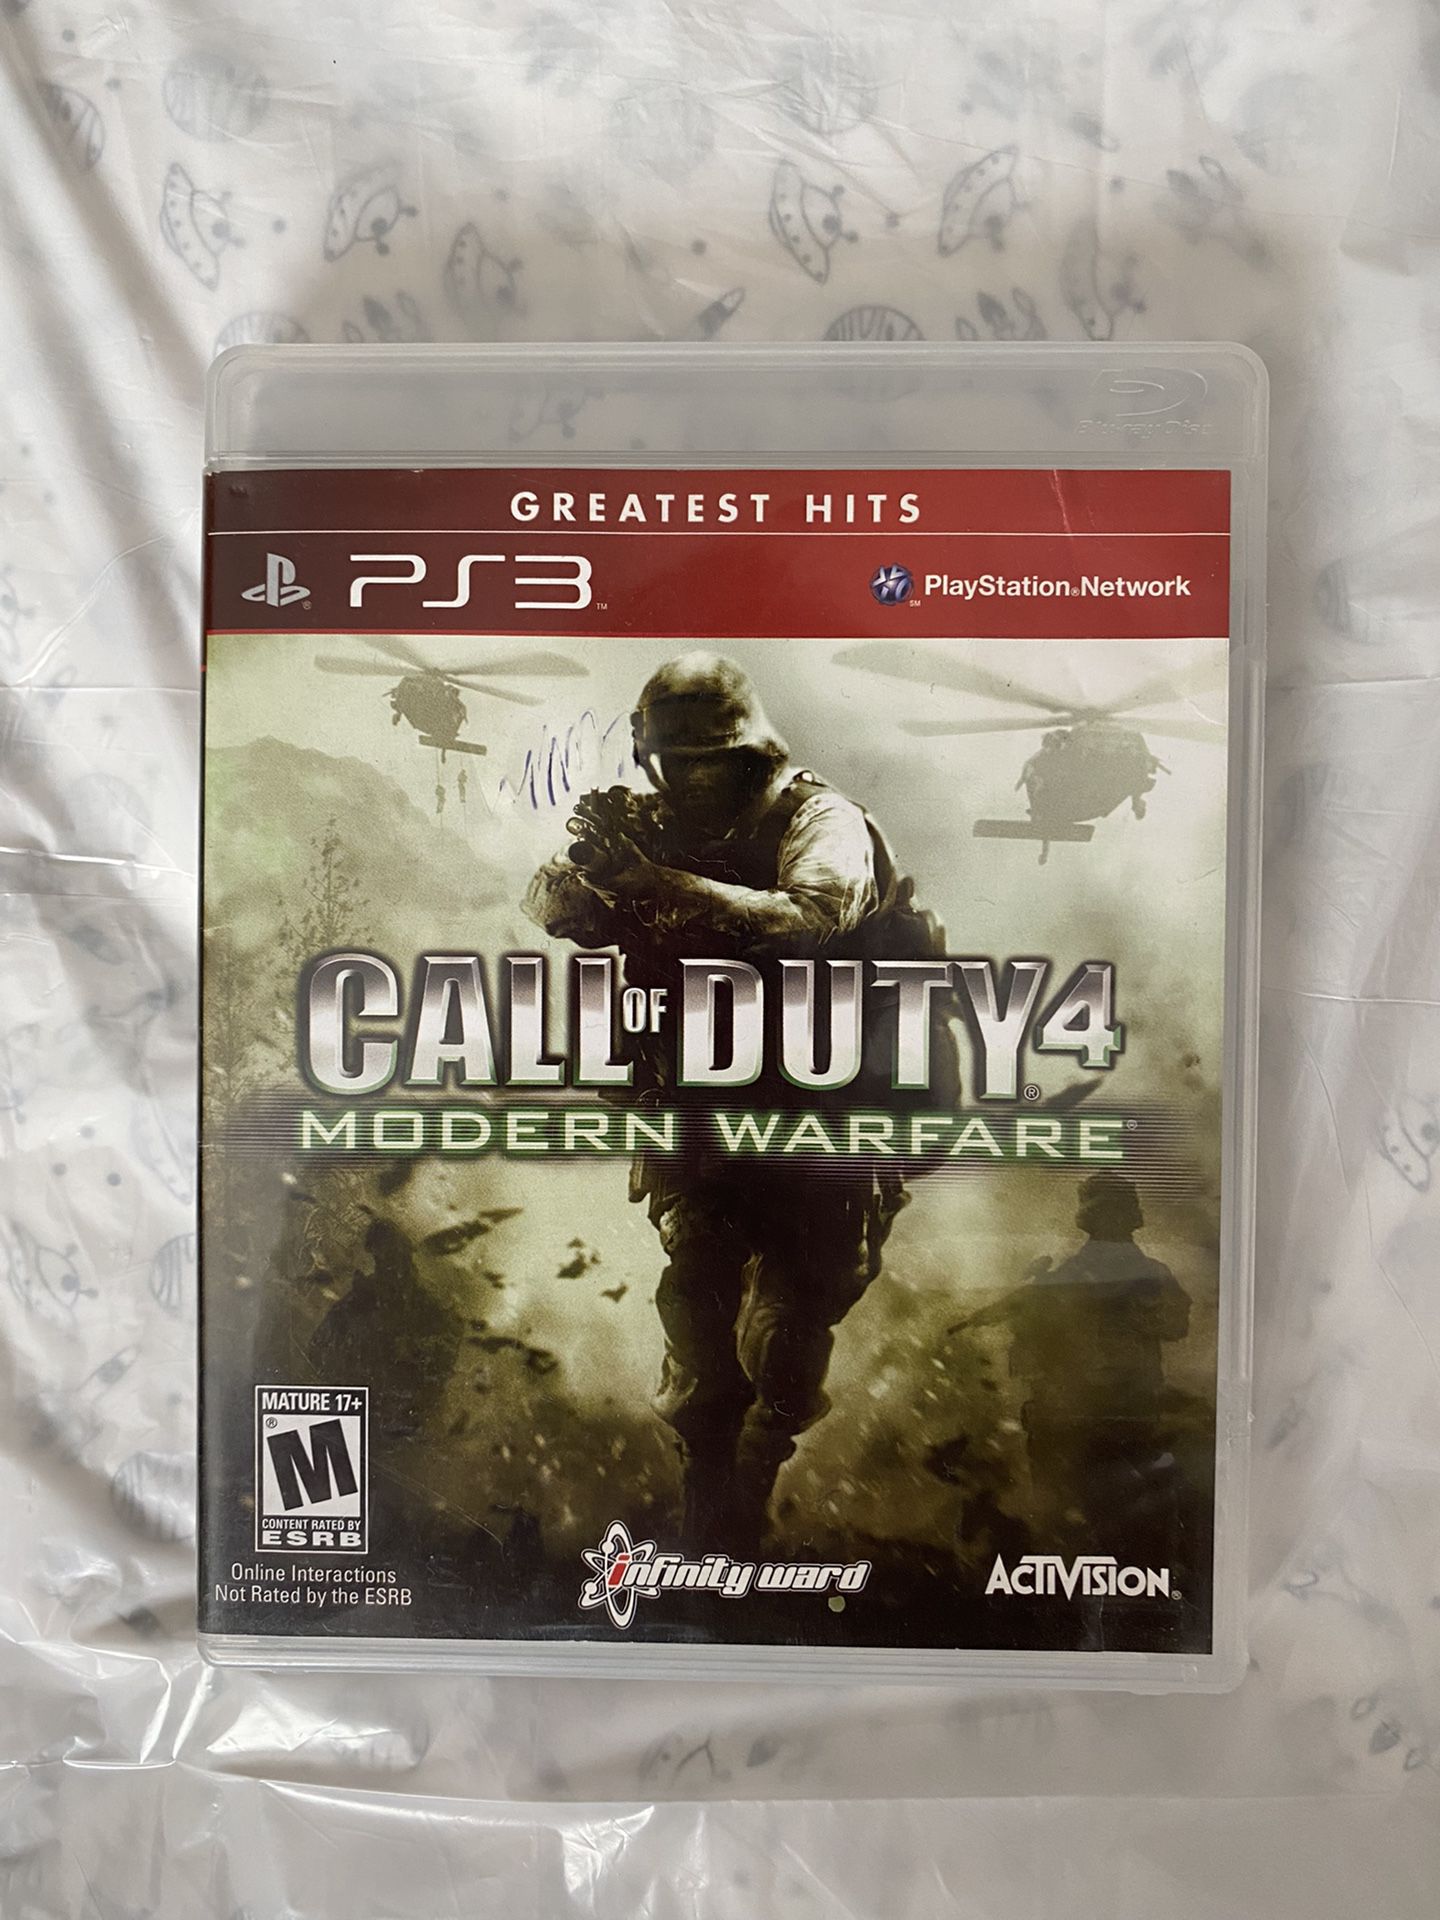 Call Of Duty 4: Modern Warfare for PS3